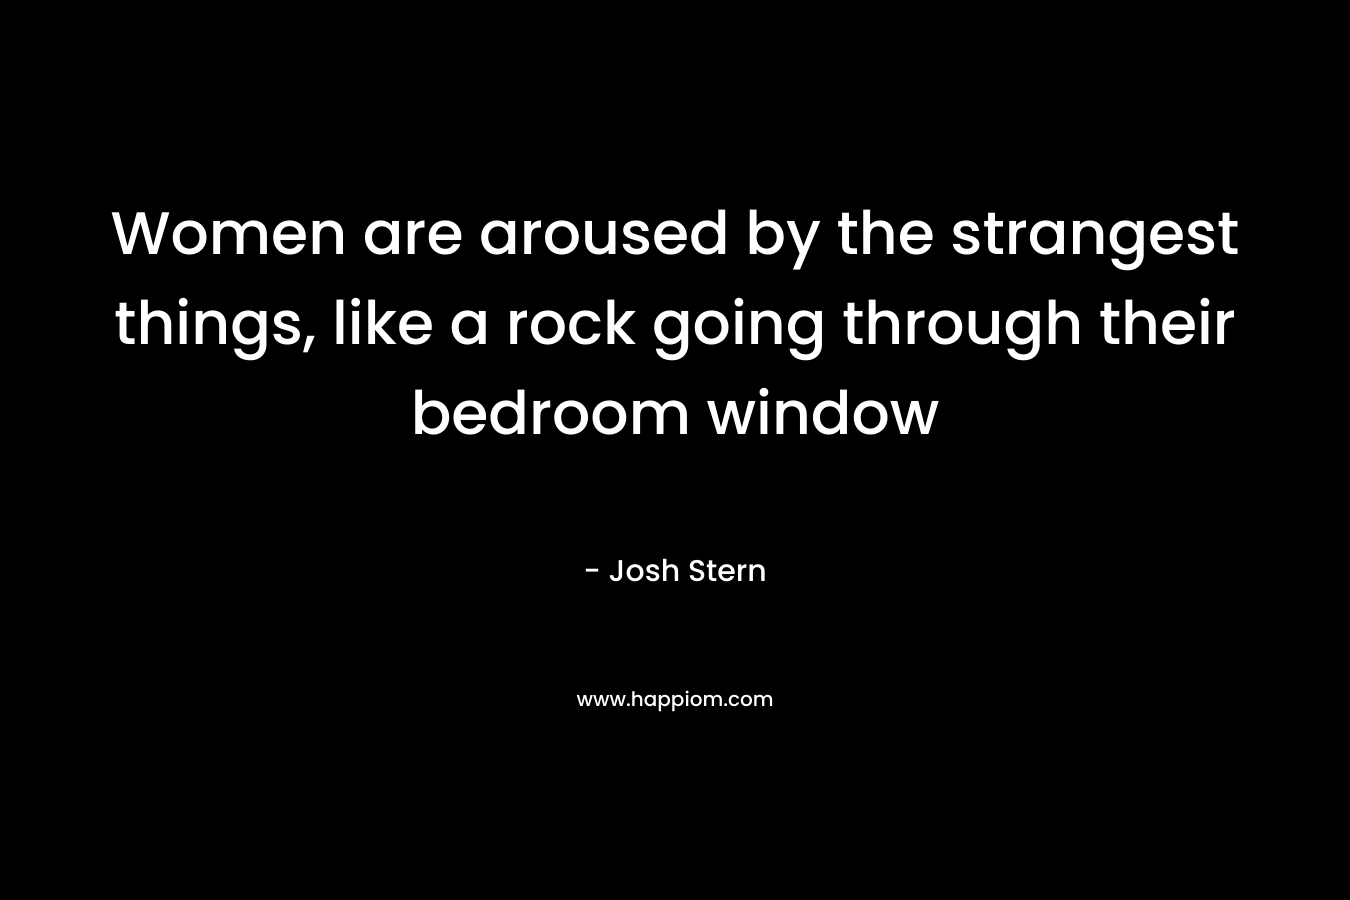 Women are aroused by the strangest things, like a rock going through their bedroom window – Josh Stern